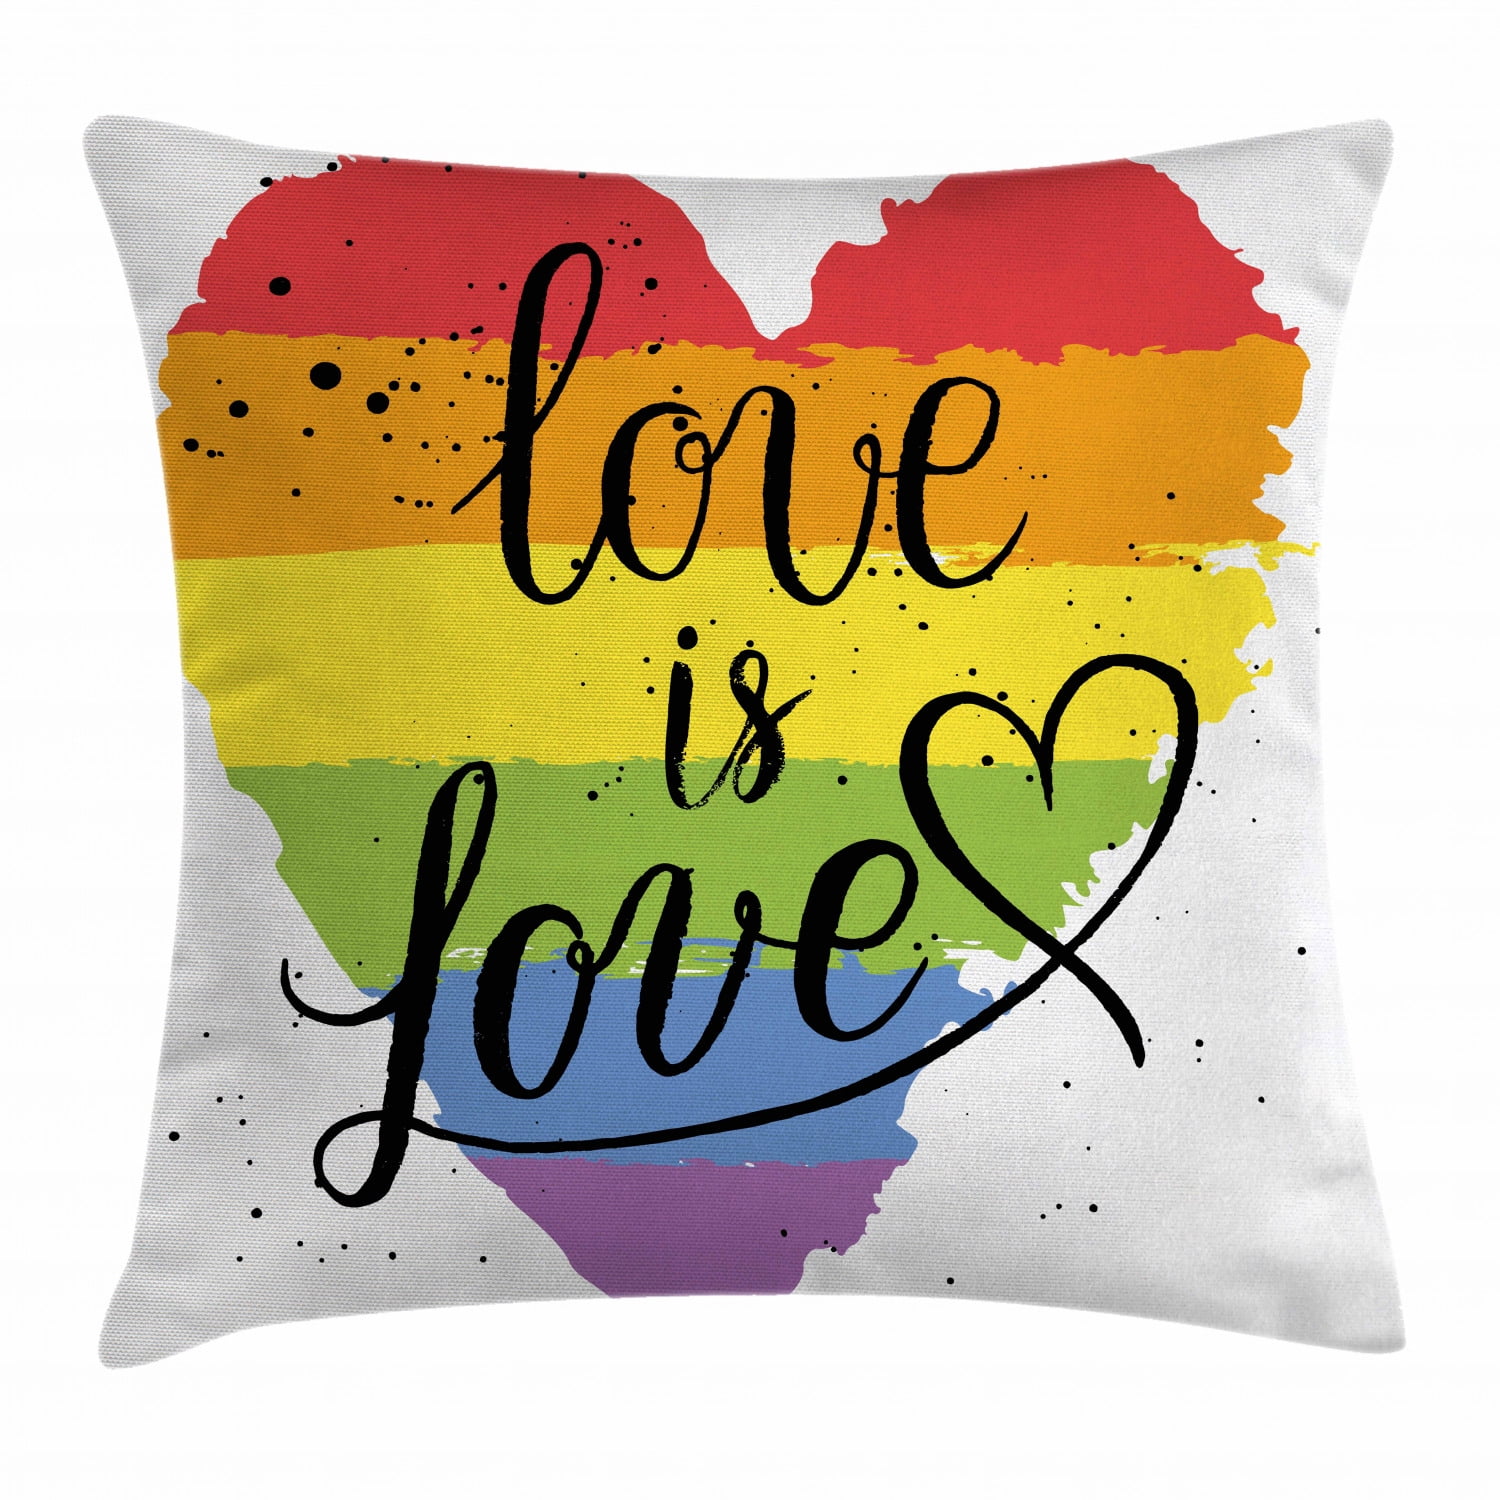 ADD Pillow Insert Gay Colorful LGBT Proud Sequin Pillow with Insert Gift Magic Cushion Merchandise Throw Home Decor Merch 40 x 40 cm